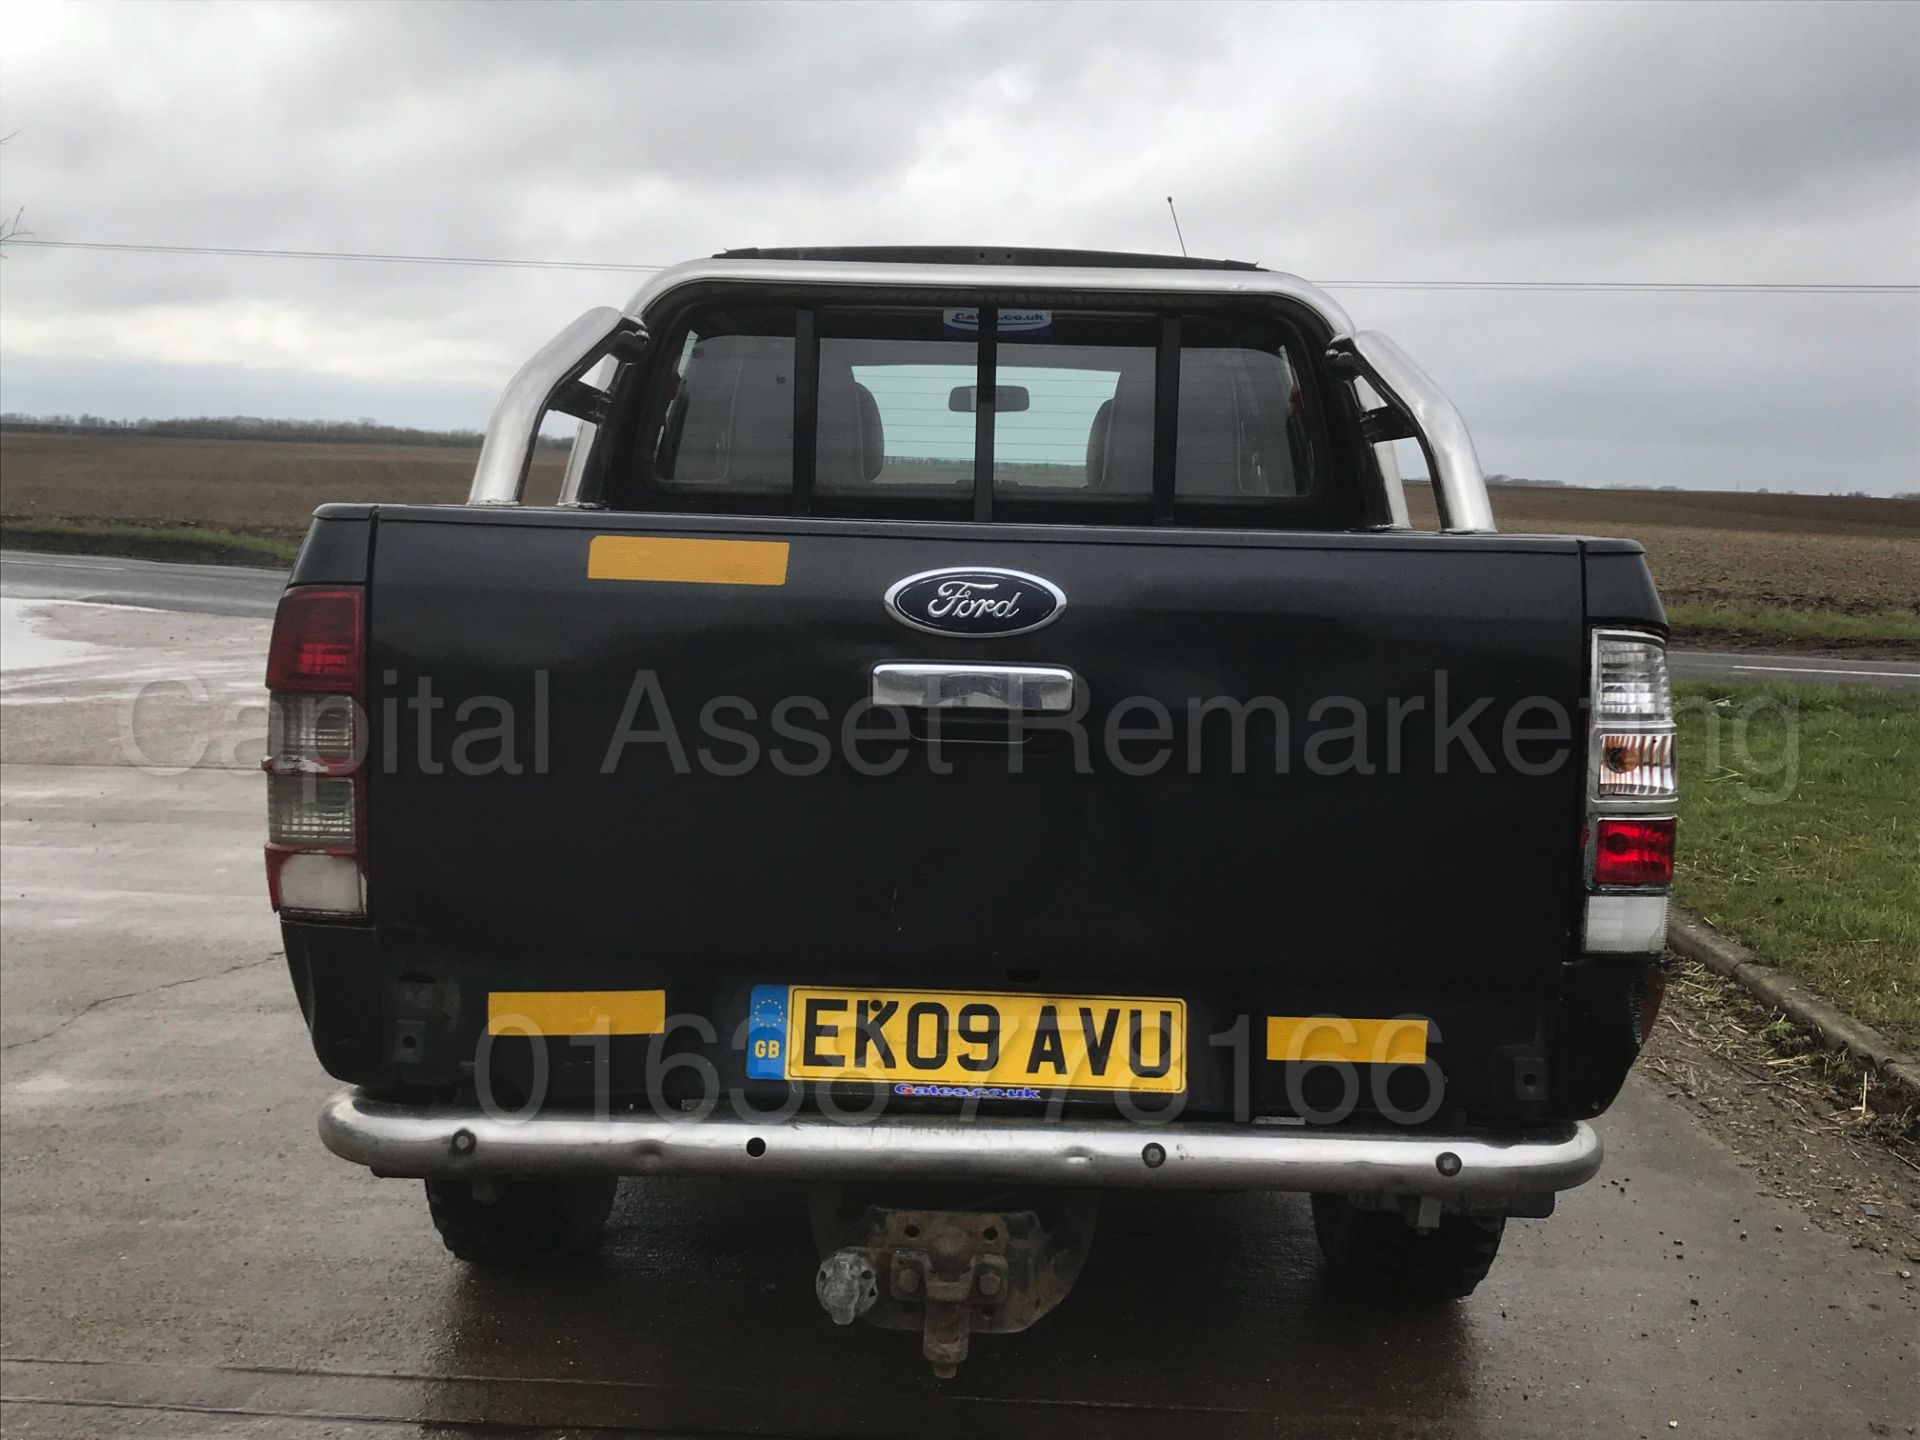 FORD RANGER 'THUNDER' DOUBLE CAB PICK-UP (2009 ) '2.5 TDCI - 143 BHP' *LEATHER - AIR CON* (NO VAT) - Image 5 of 29